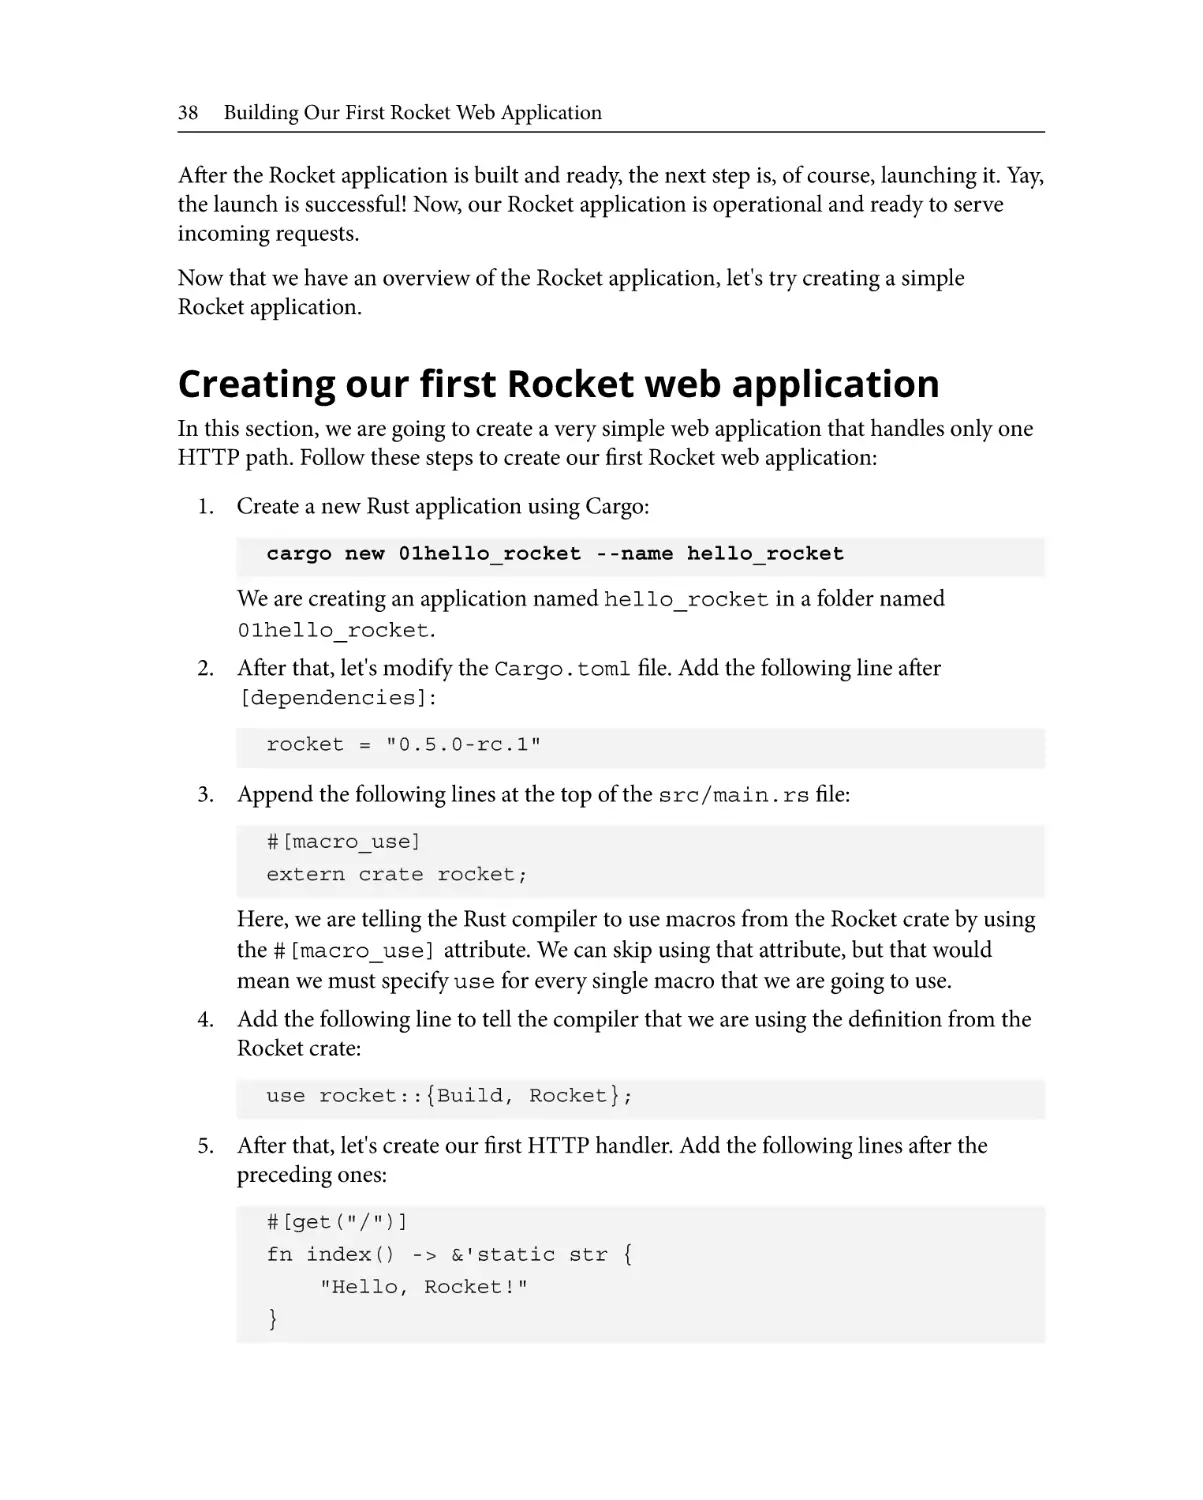 Creating our first Rocket web application